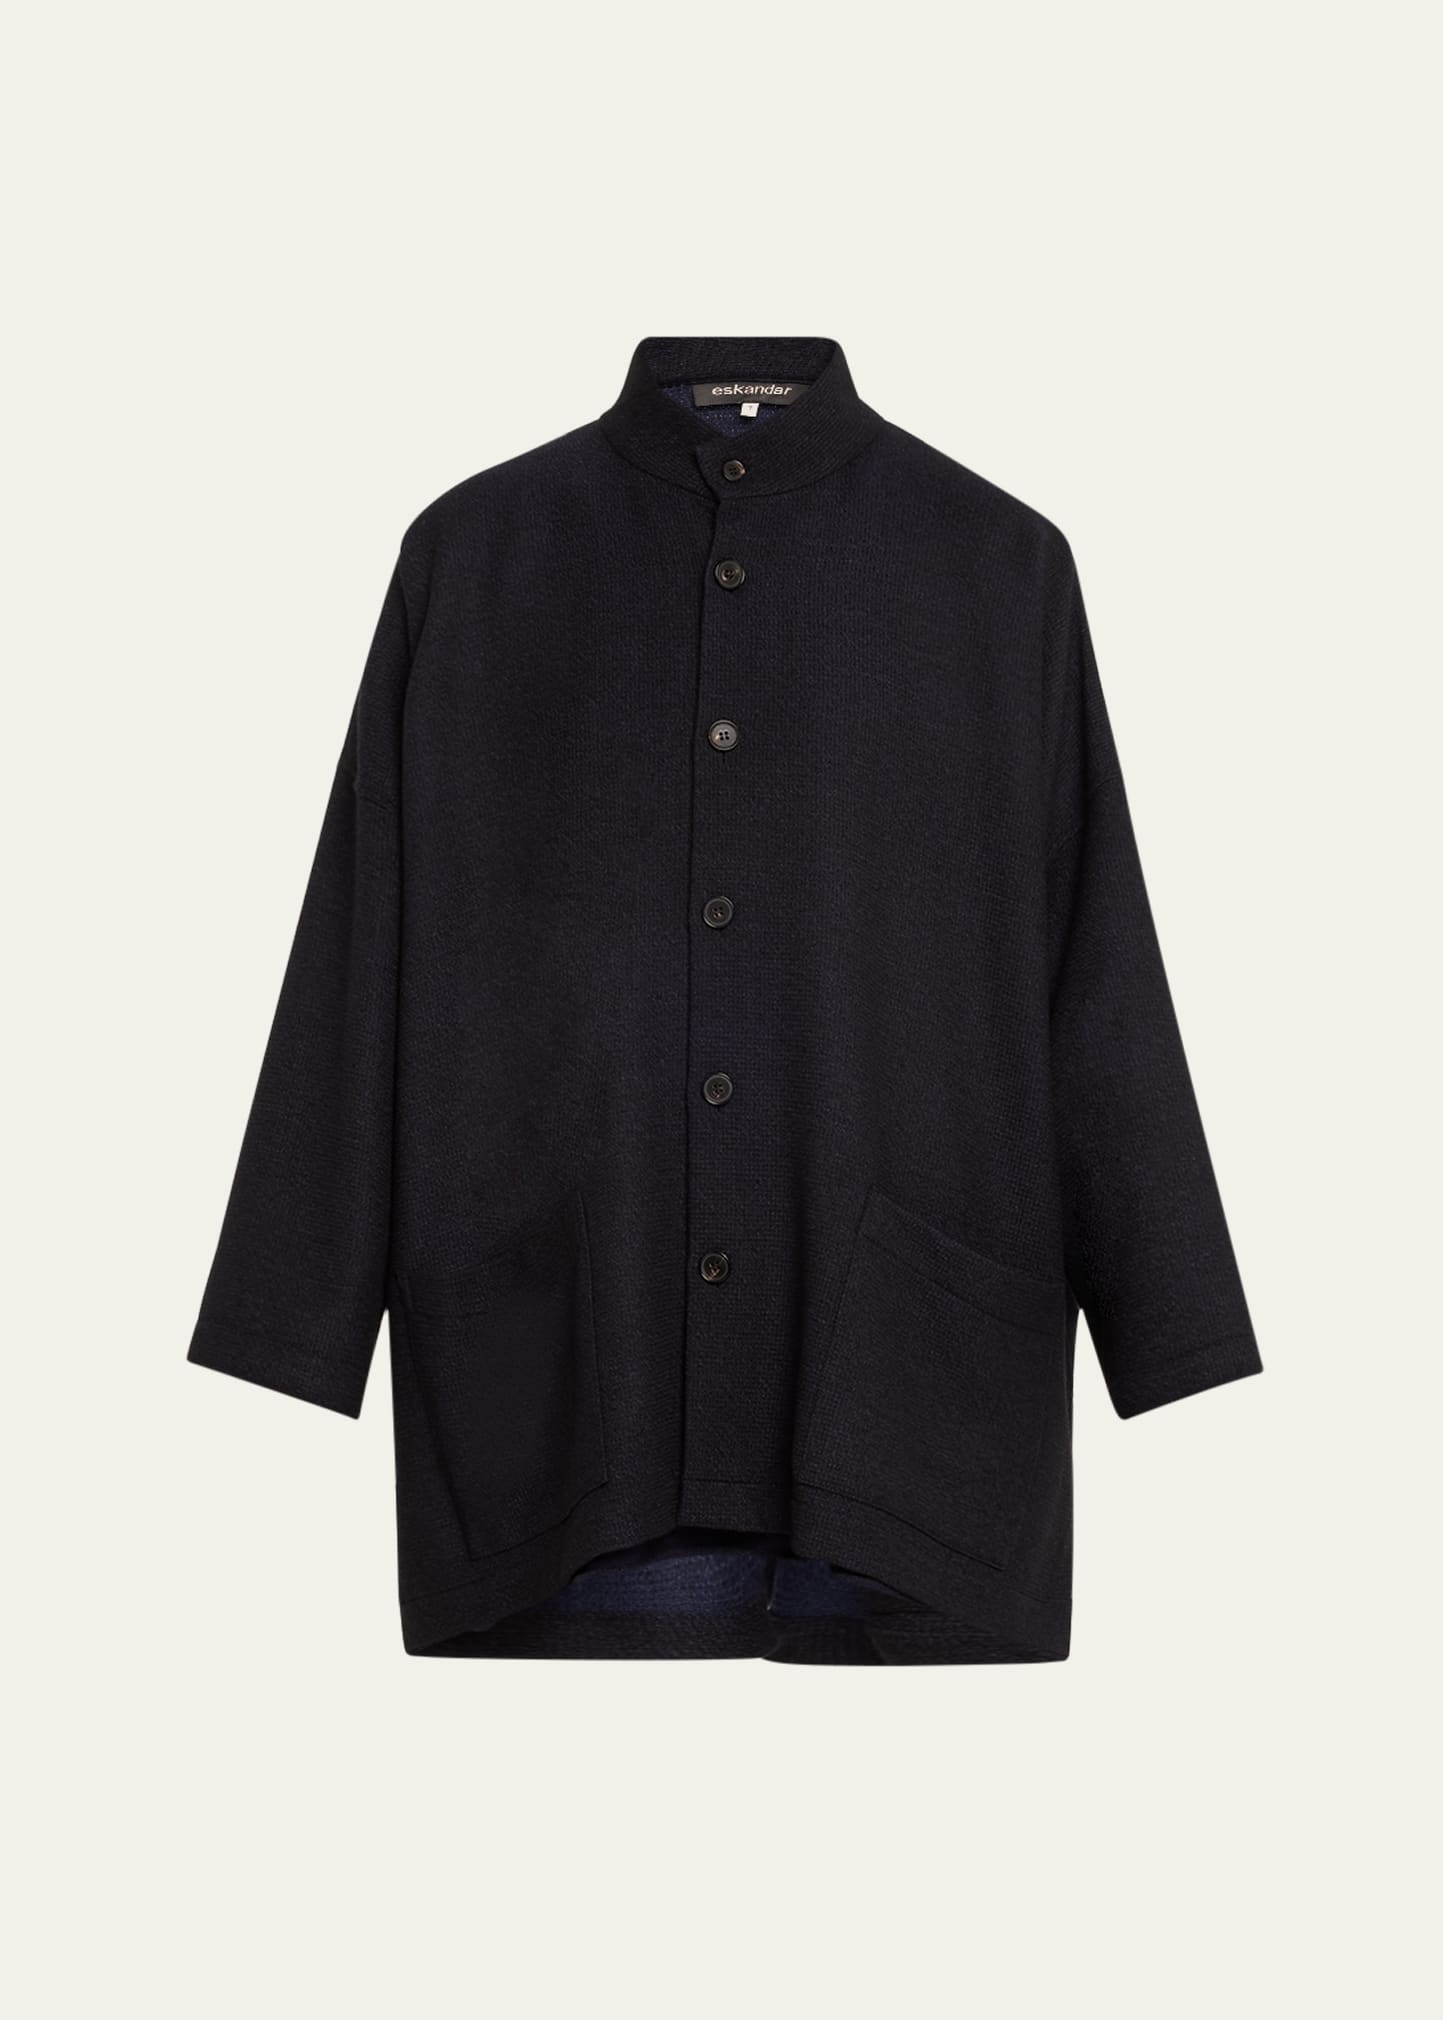 Wide Open Stand Collar Jacket (Long Length)